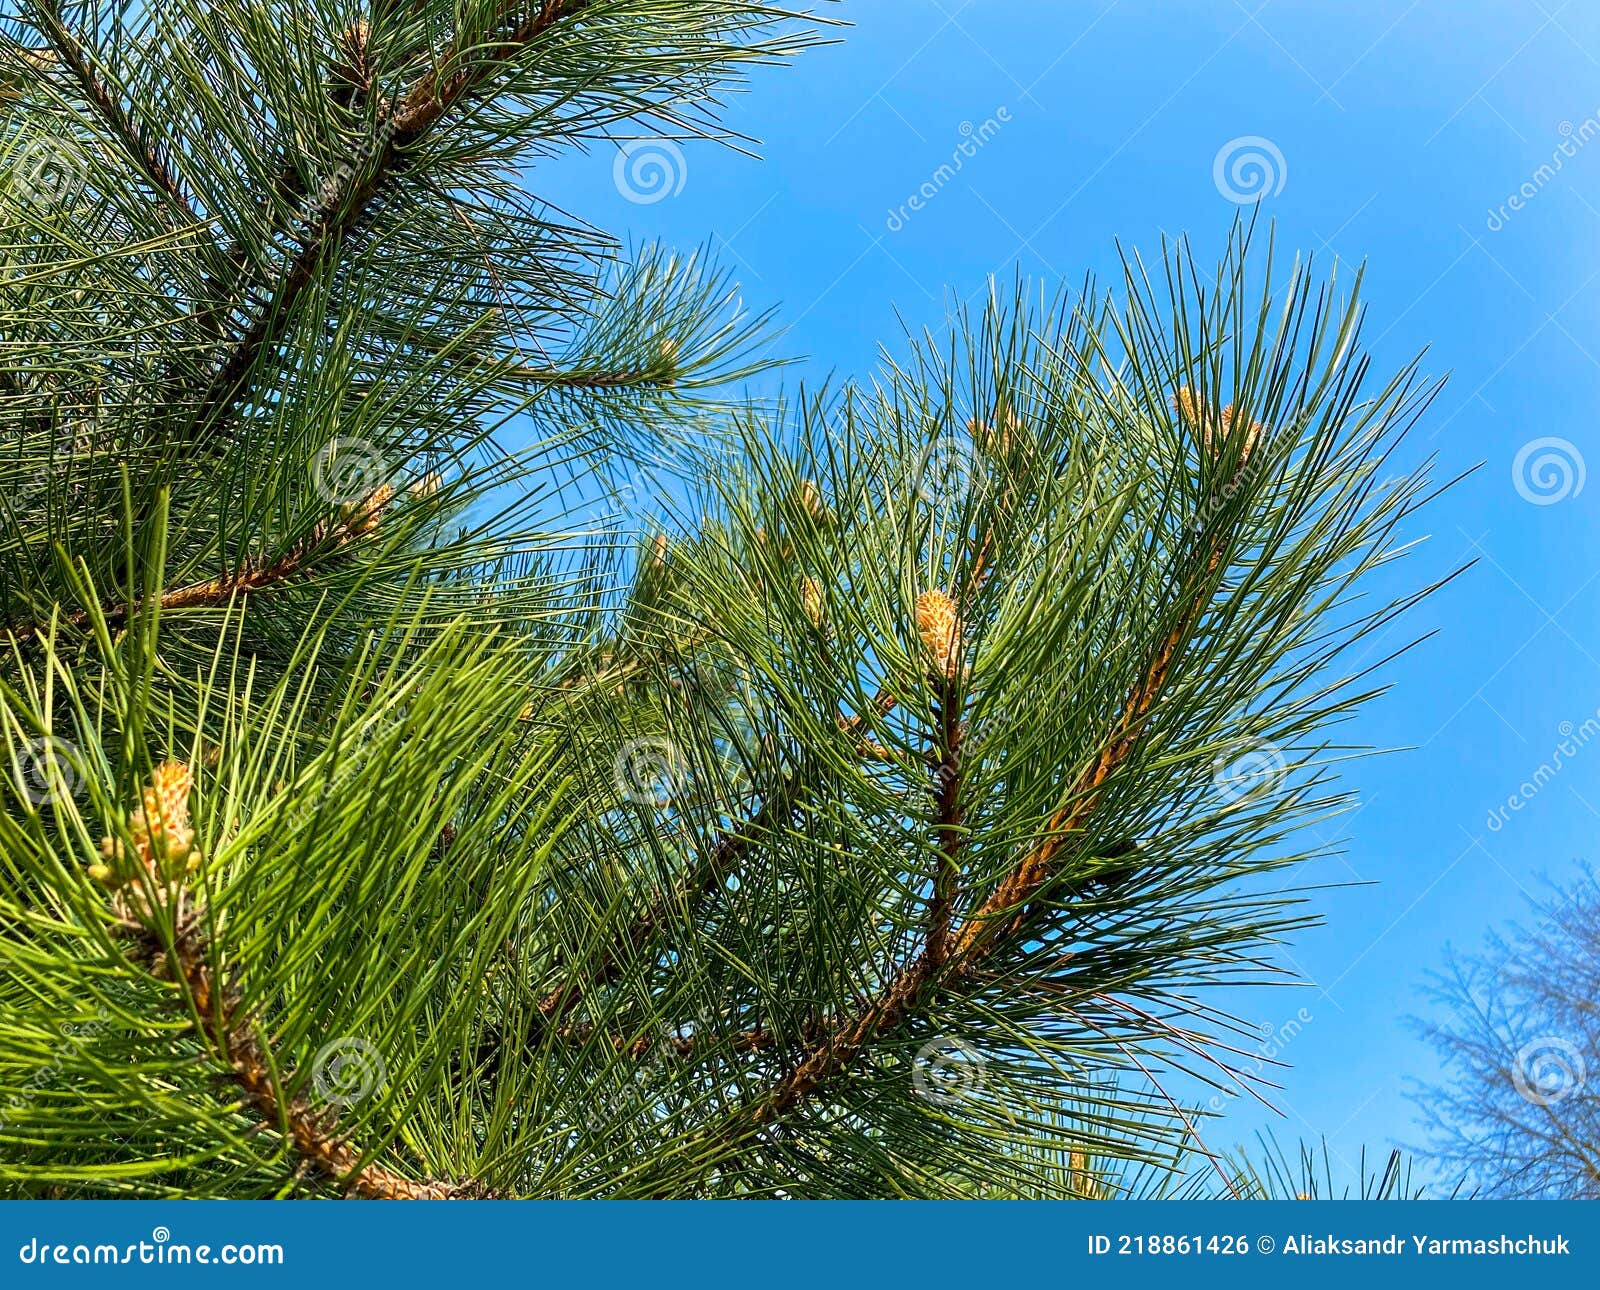 young aleppo pine pinus halepensis grows in the park